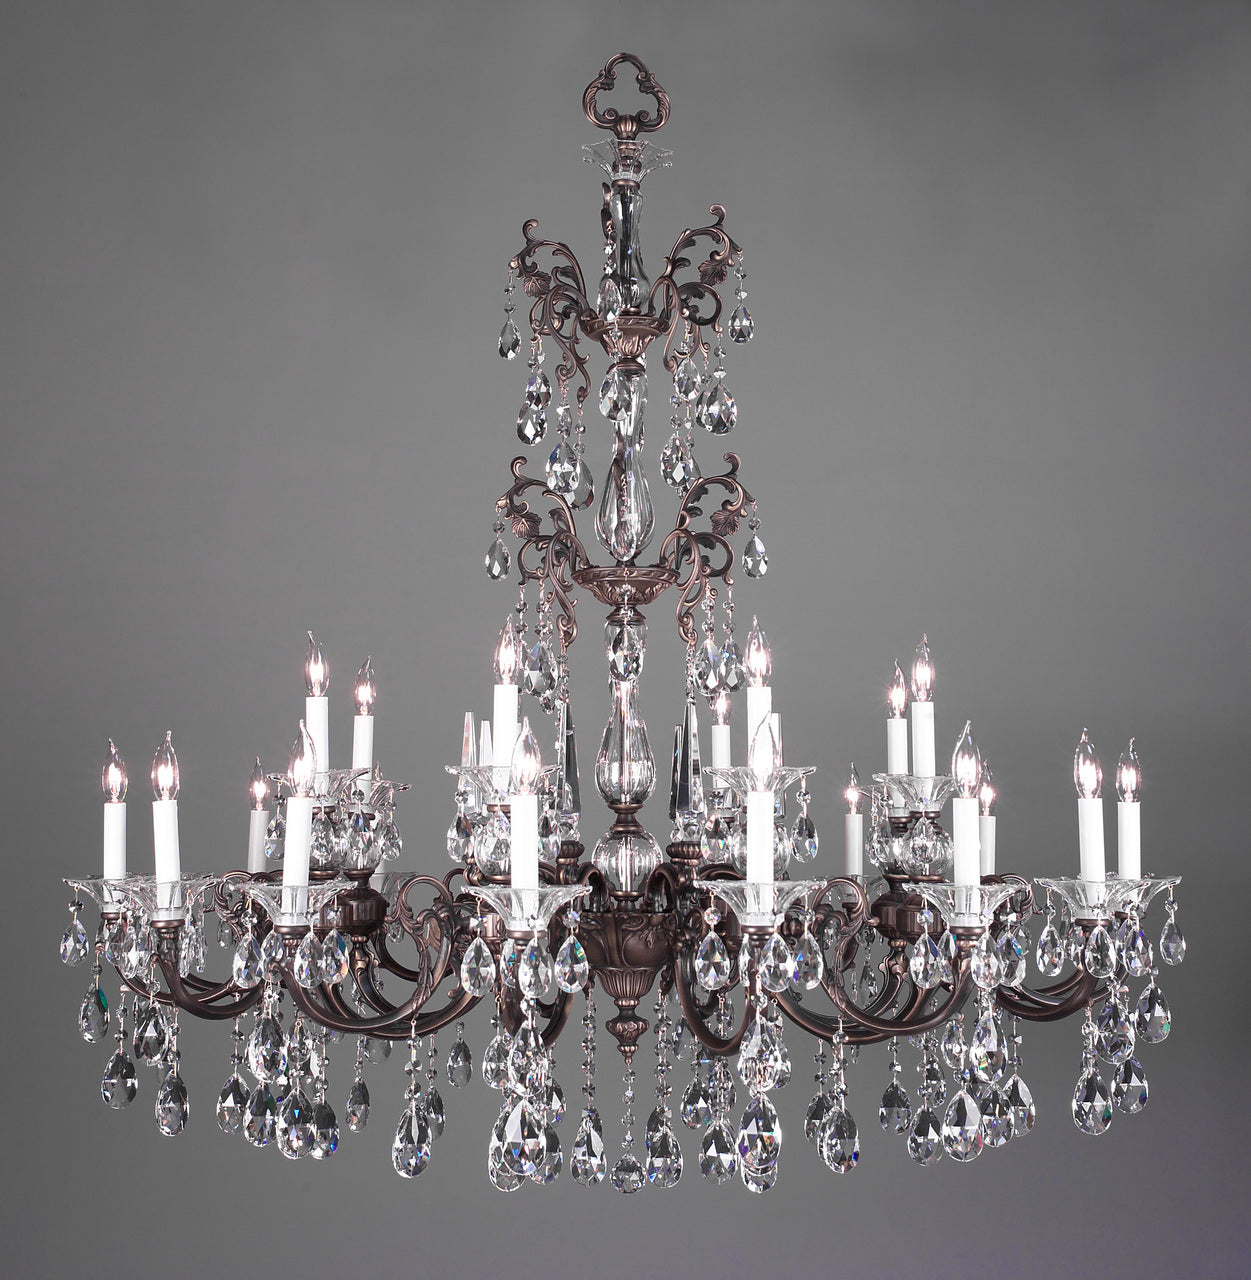 Classic Lighting 57065 RB SGT Via Lombardi Crystal Chandelier in Roman Bronze (Imported from Spain)